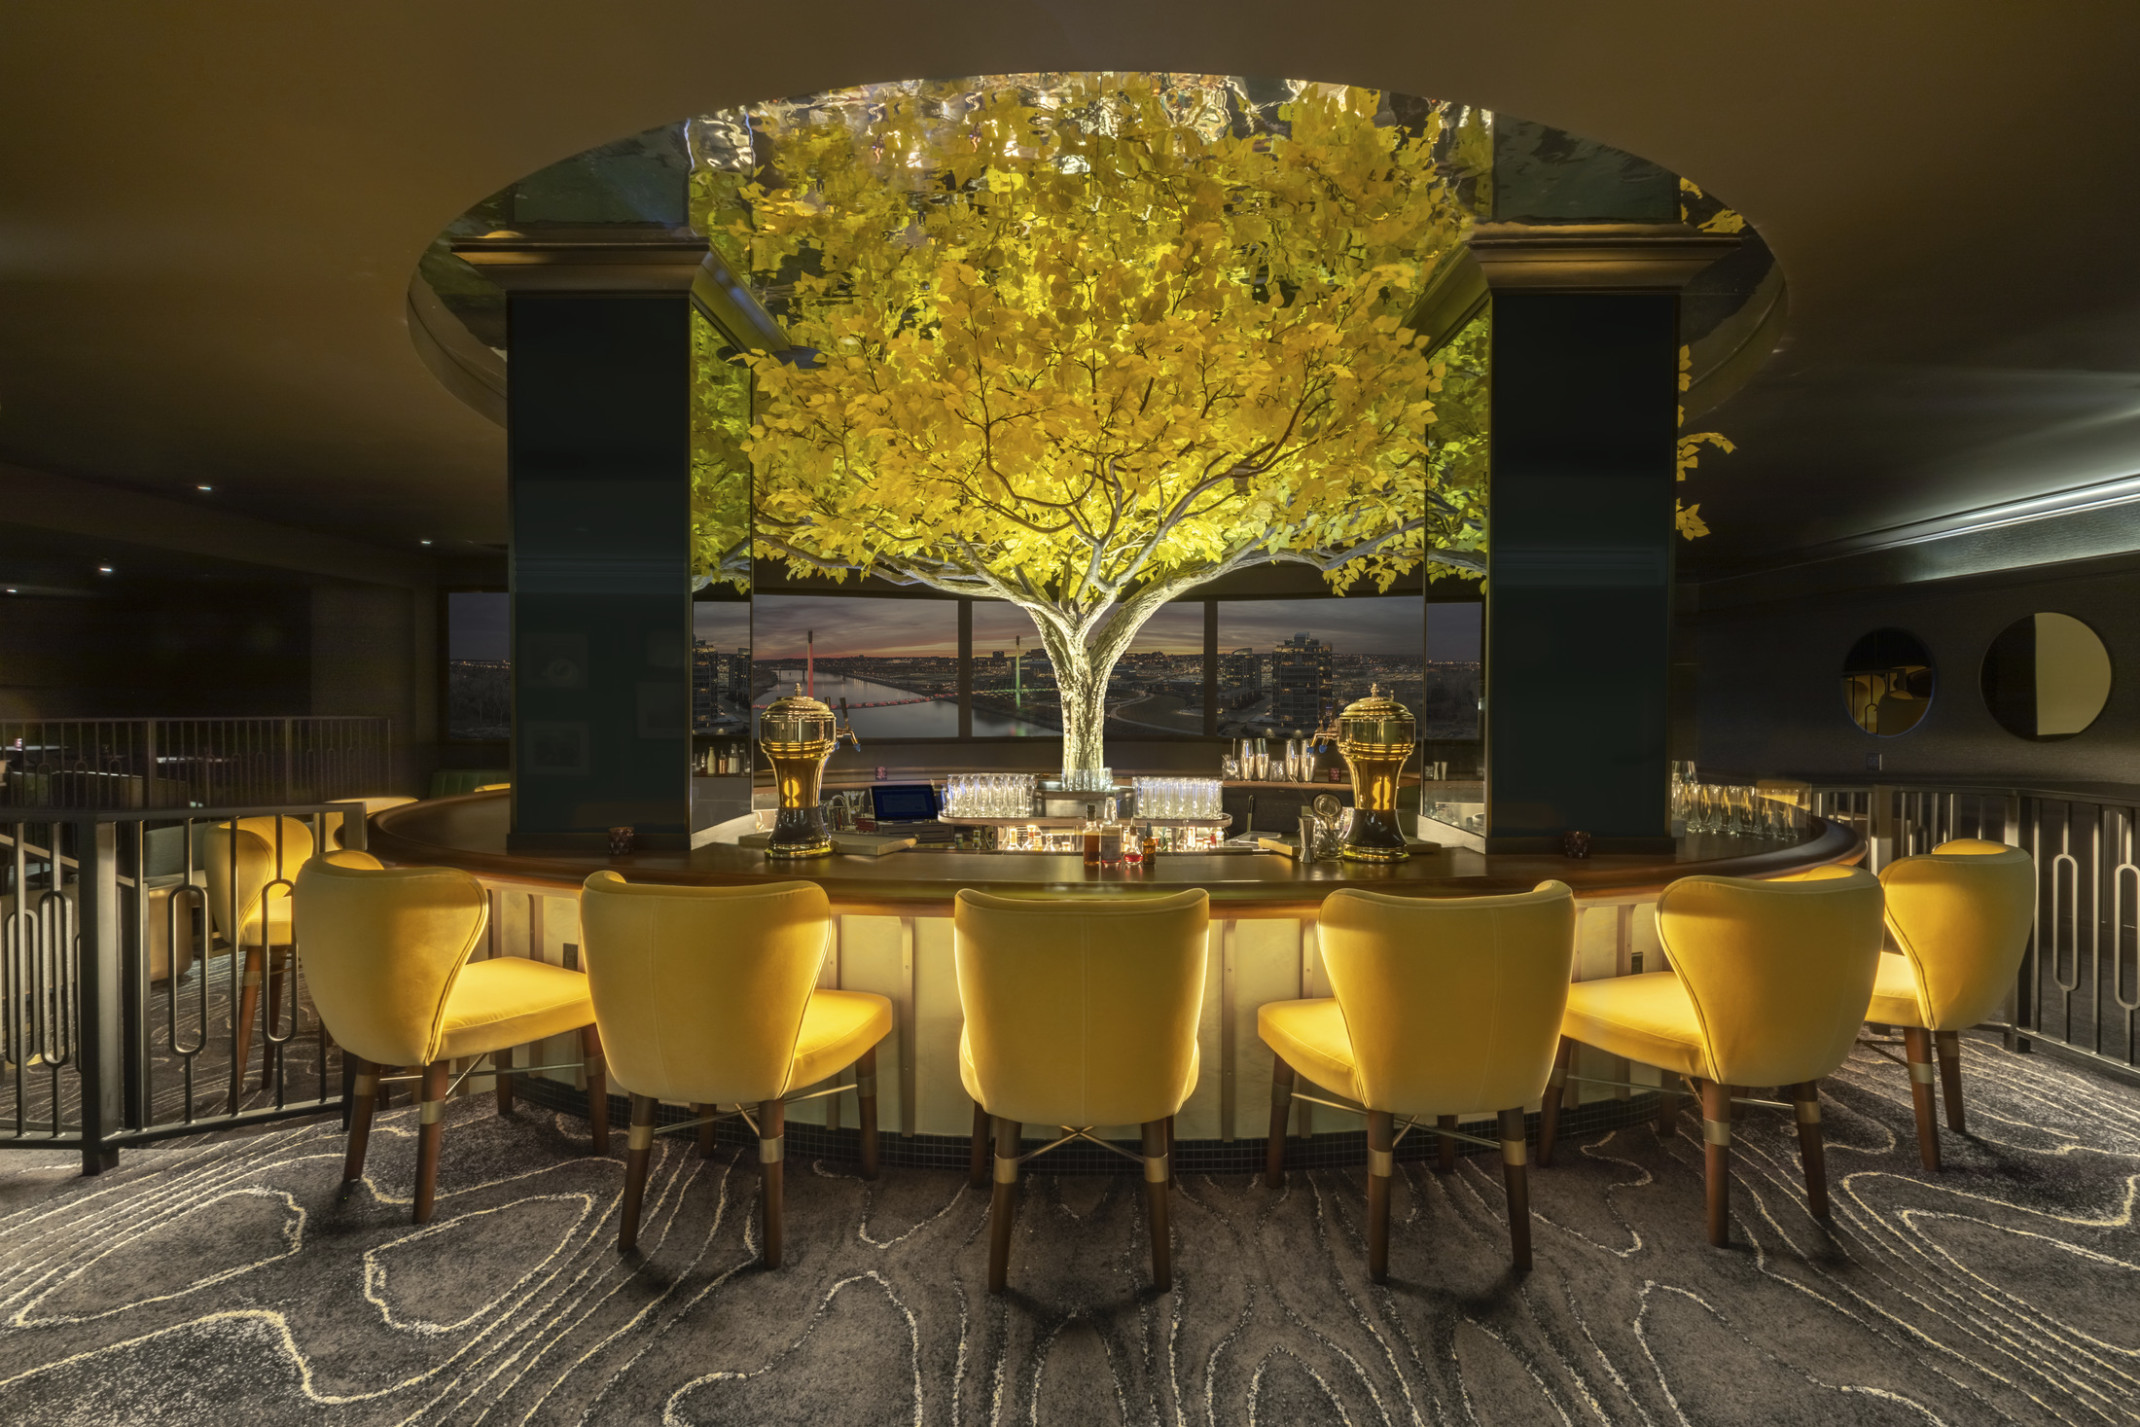 an illuminated yellow tree in the midst of in the round high top bar with yellow seats. Tree rises above round ceiling cutout